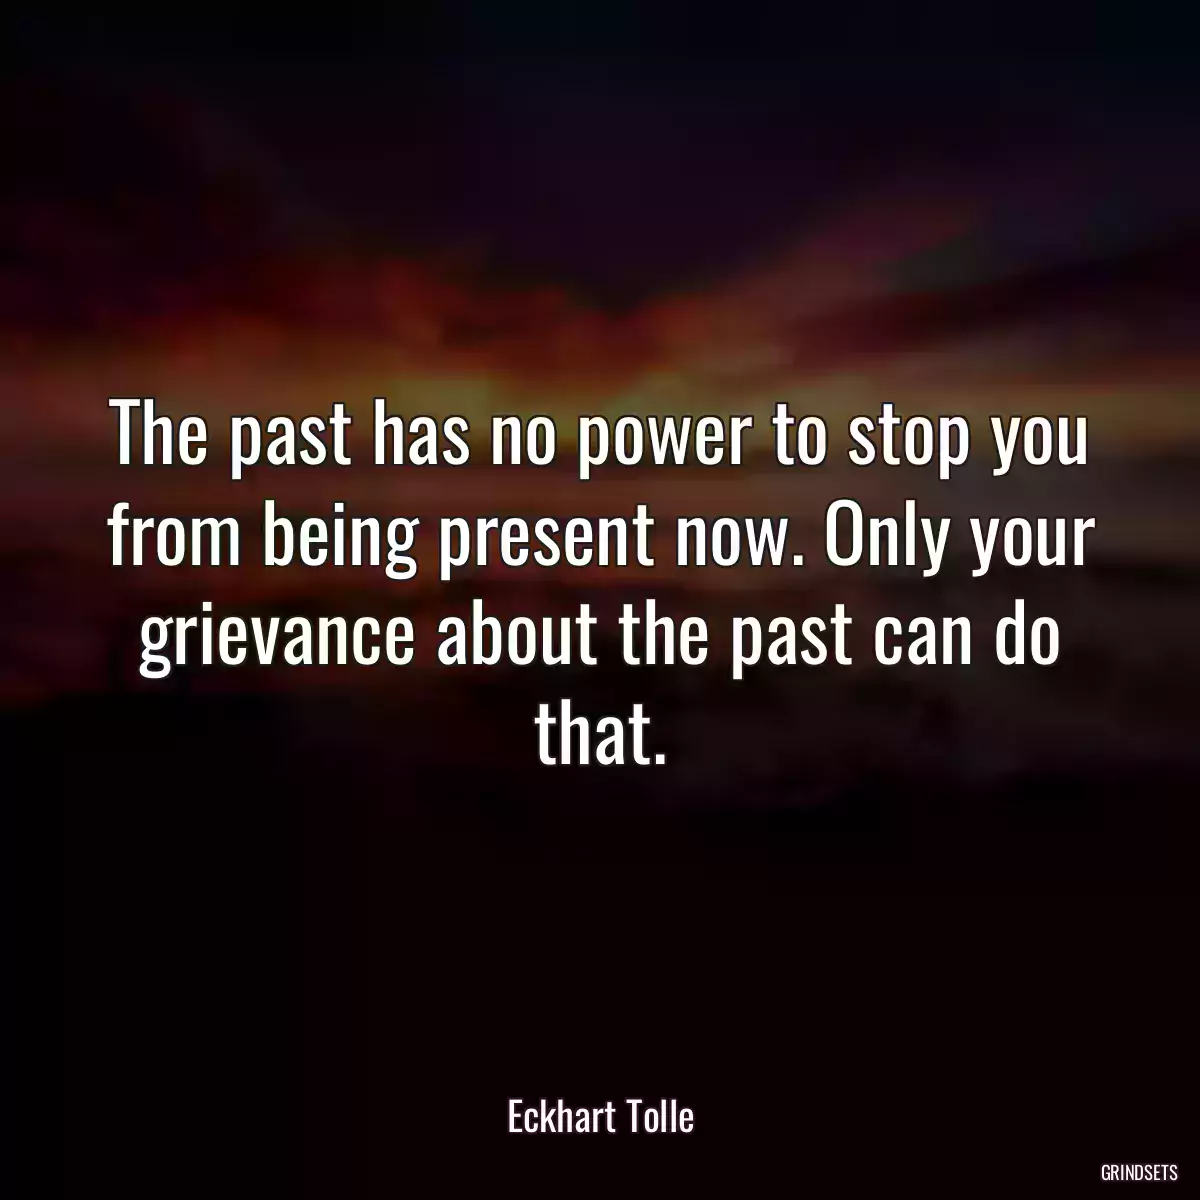 The past has no power to stop you from being present now. Only your grievance about the past can do that.